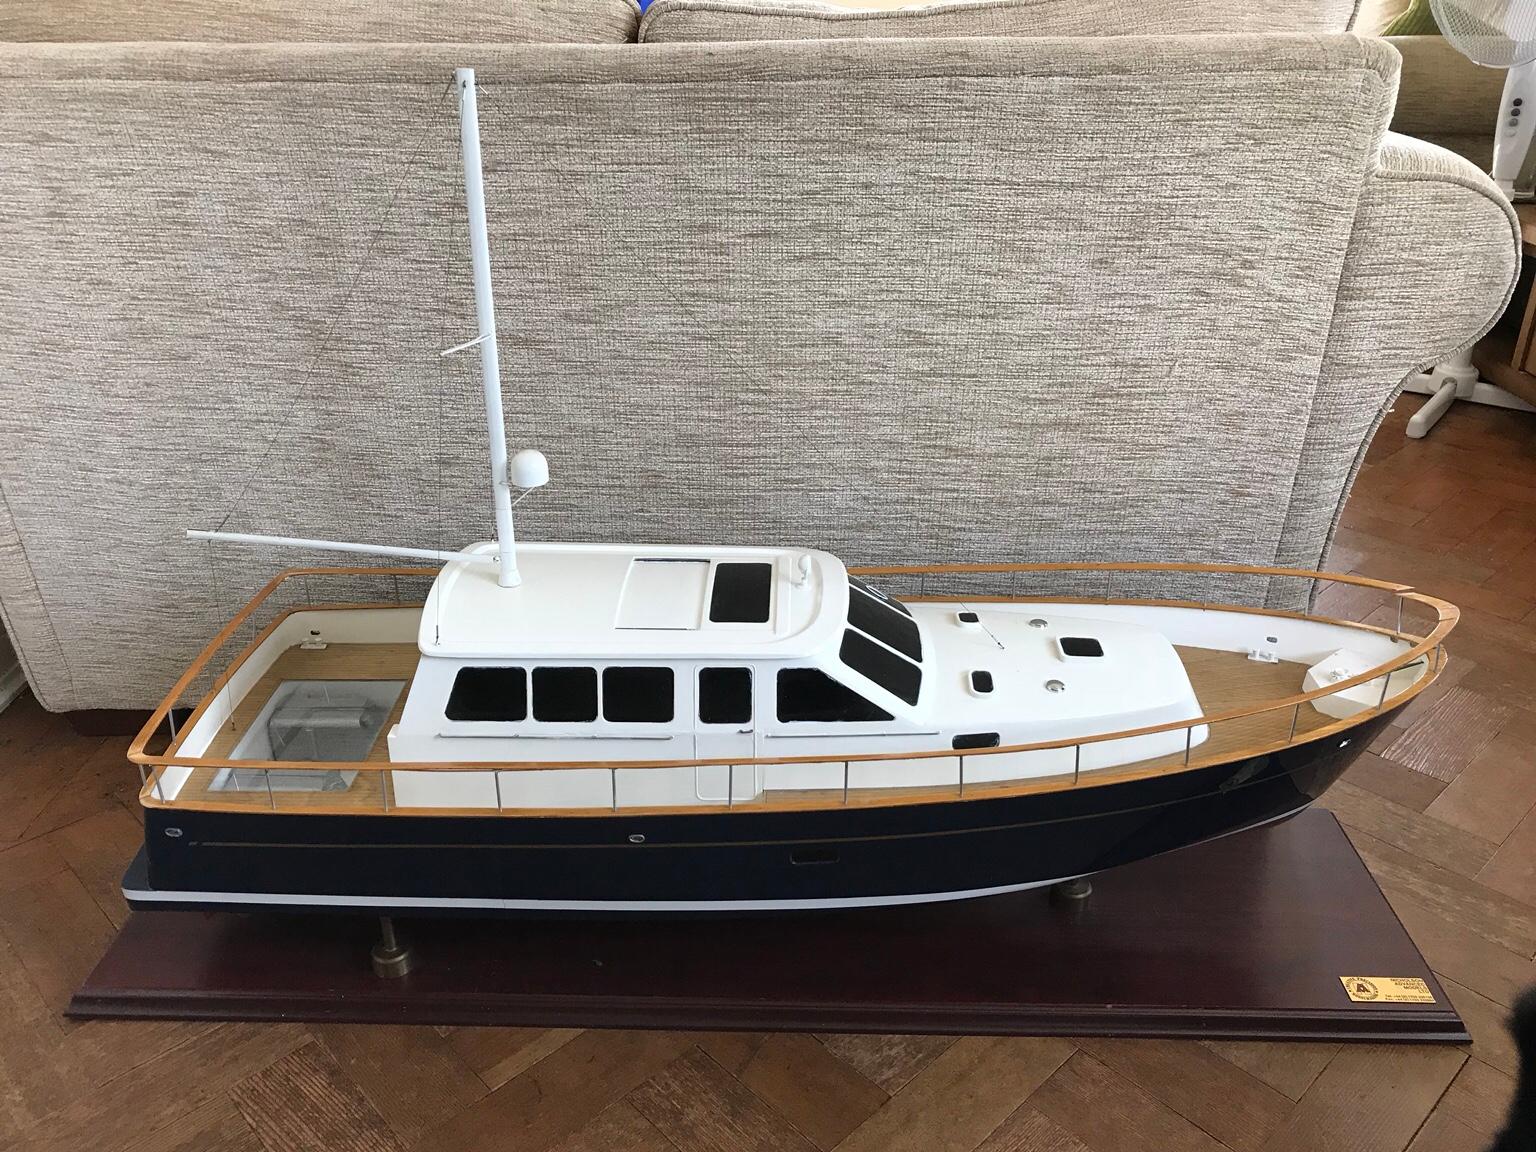 Boat builders model yacht in BN16 Arun for £25.00 for sale | Shpock